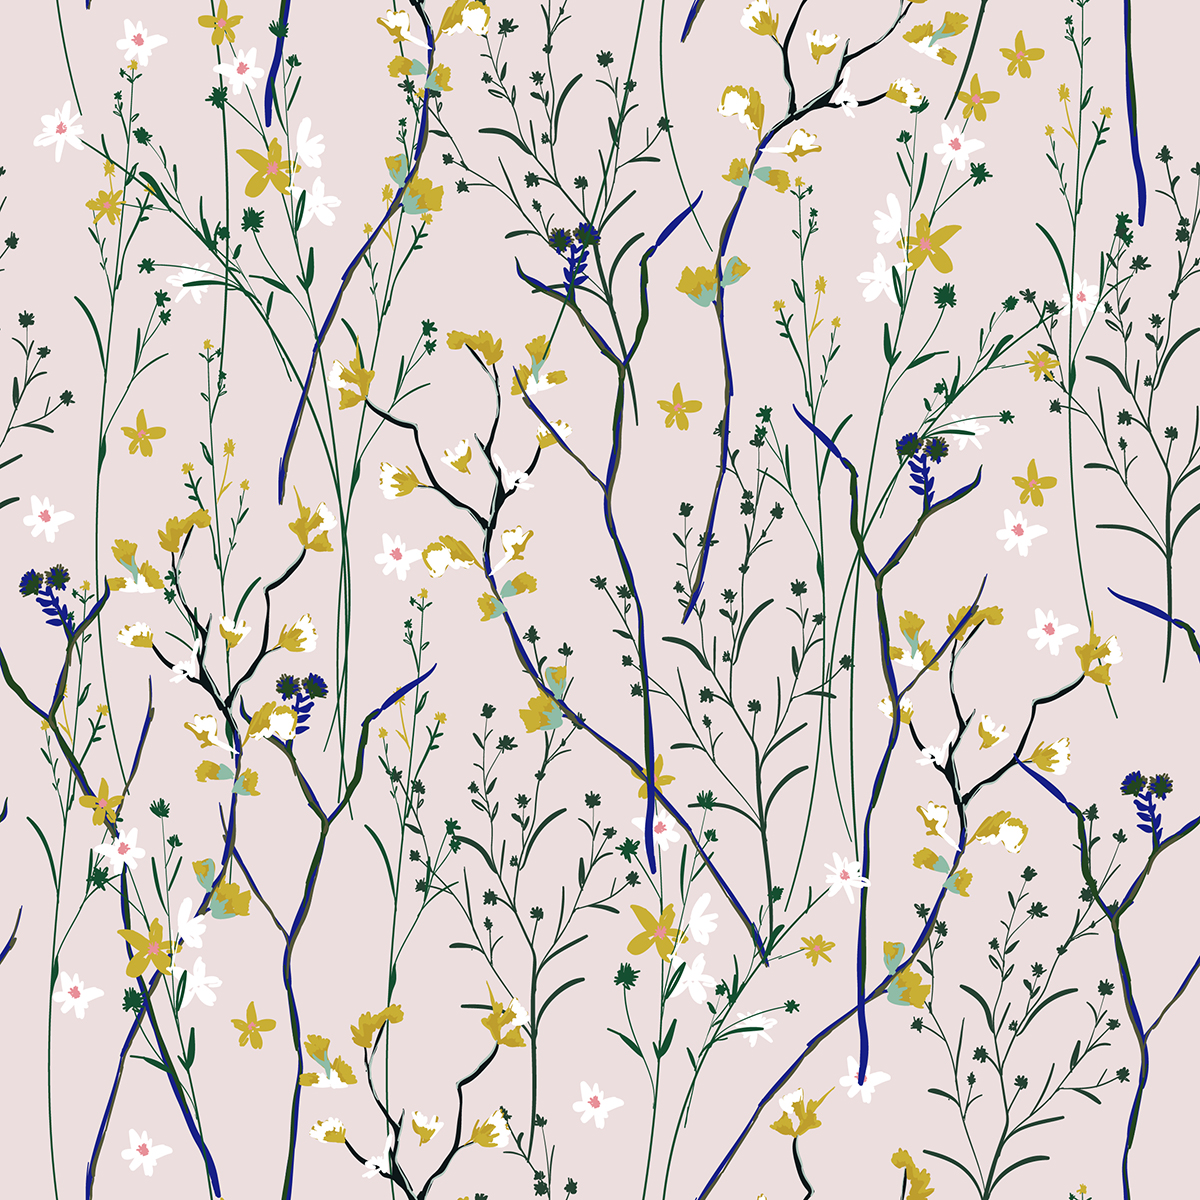 A pattern of flowers and twigs